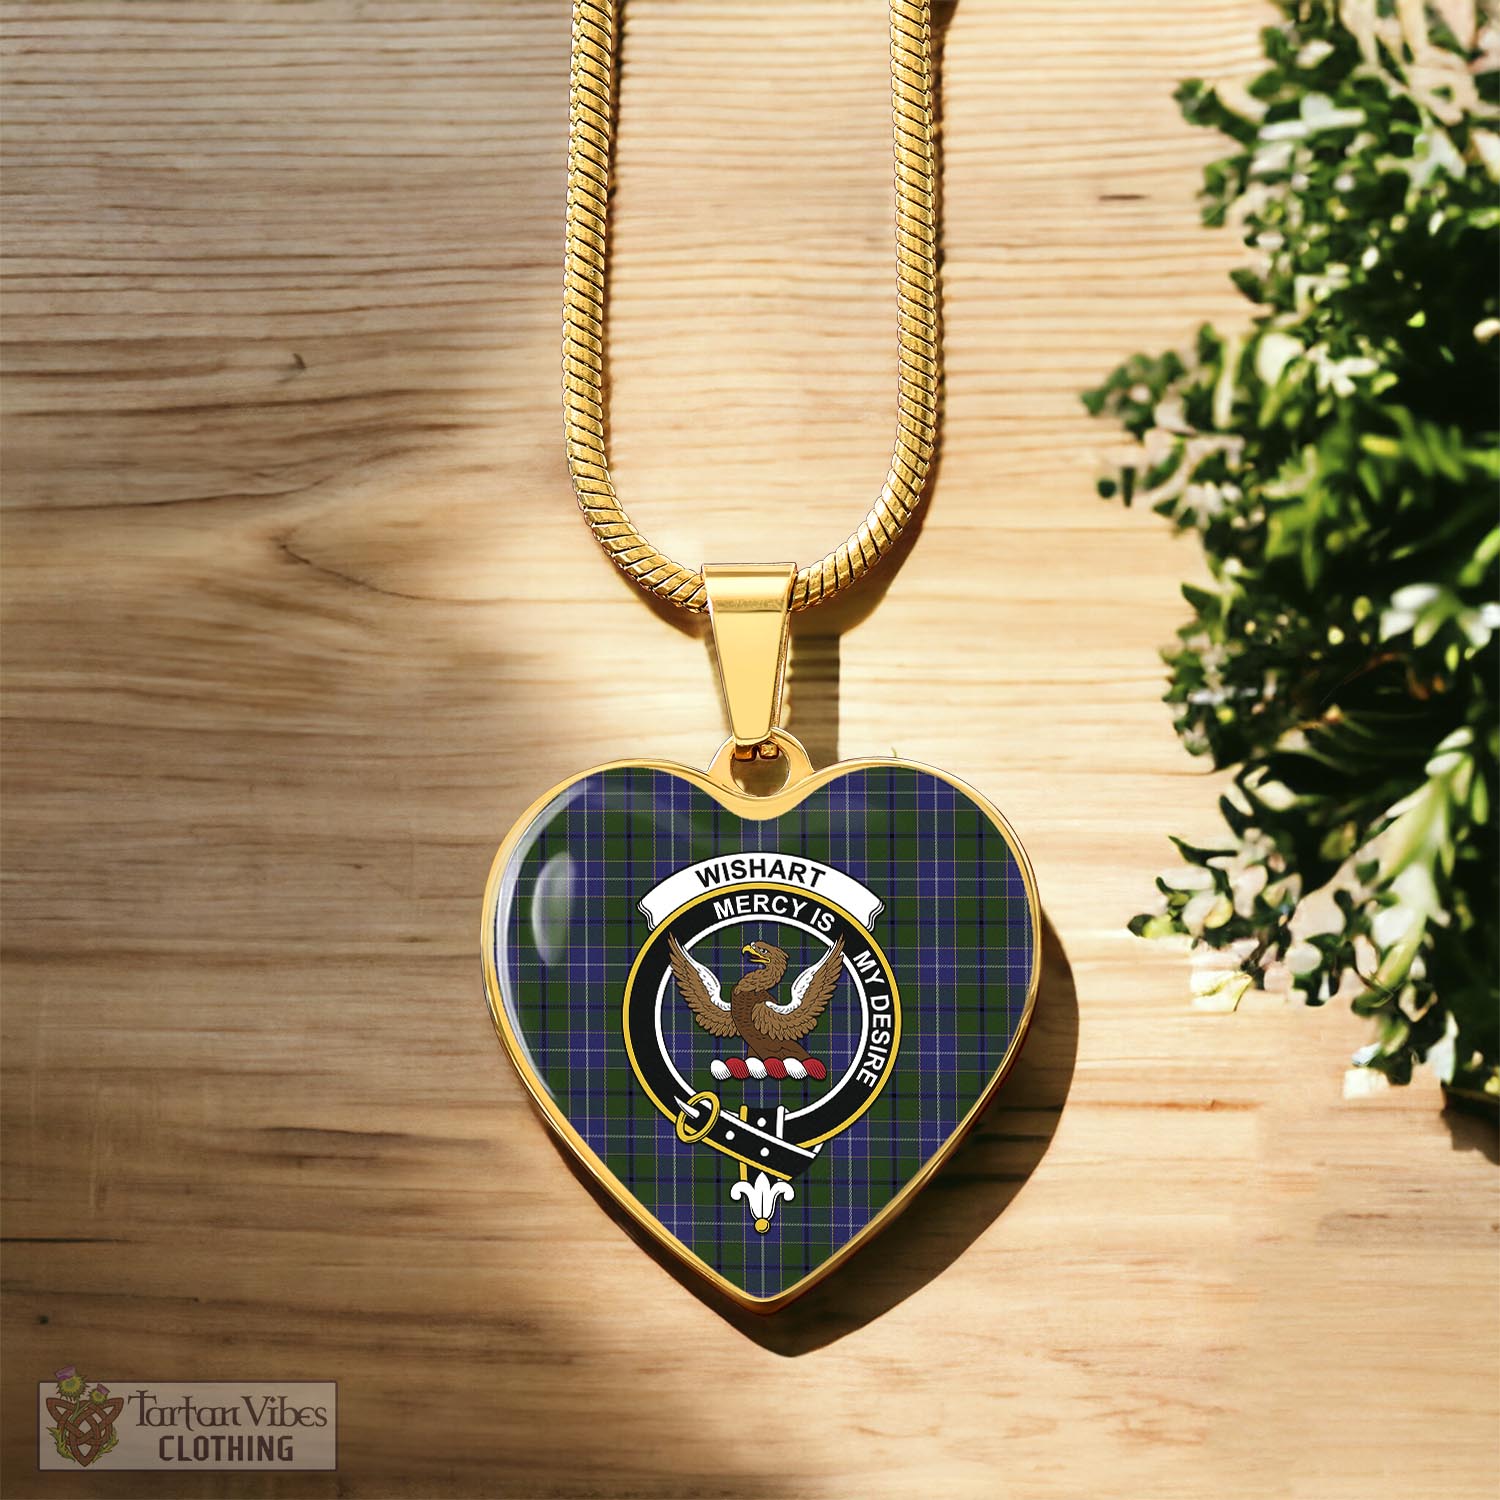 Tartan Vibes Clothing Wishart Hunting Tartan Heart Necklace with Family Crest